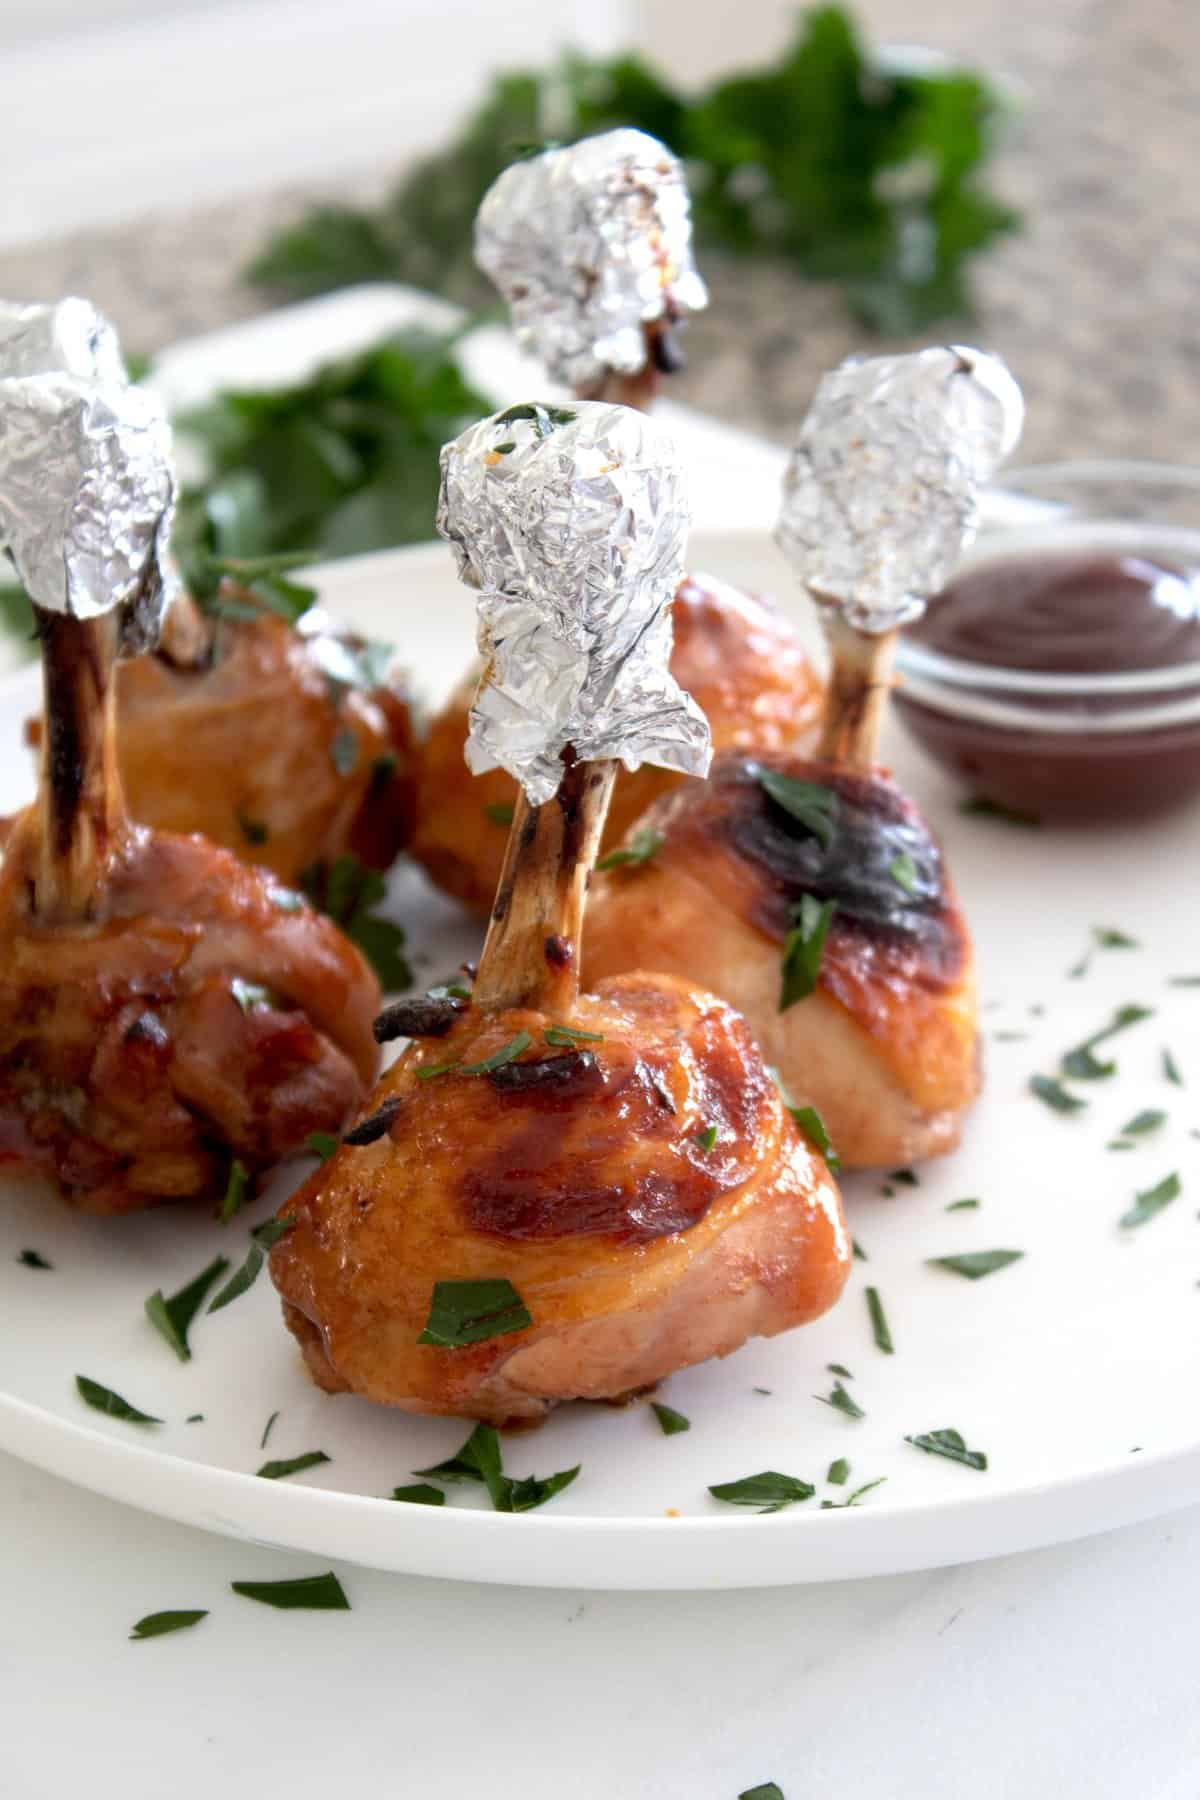 chicken lollipops on a white plate garnished with parsley flakes